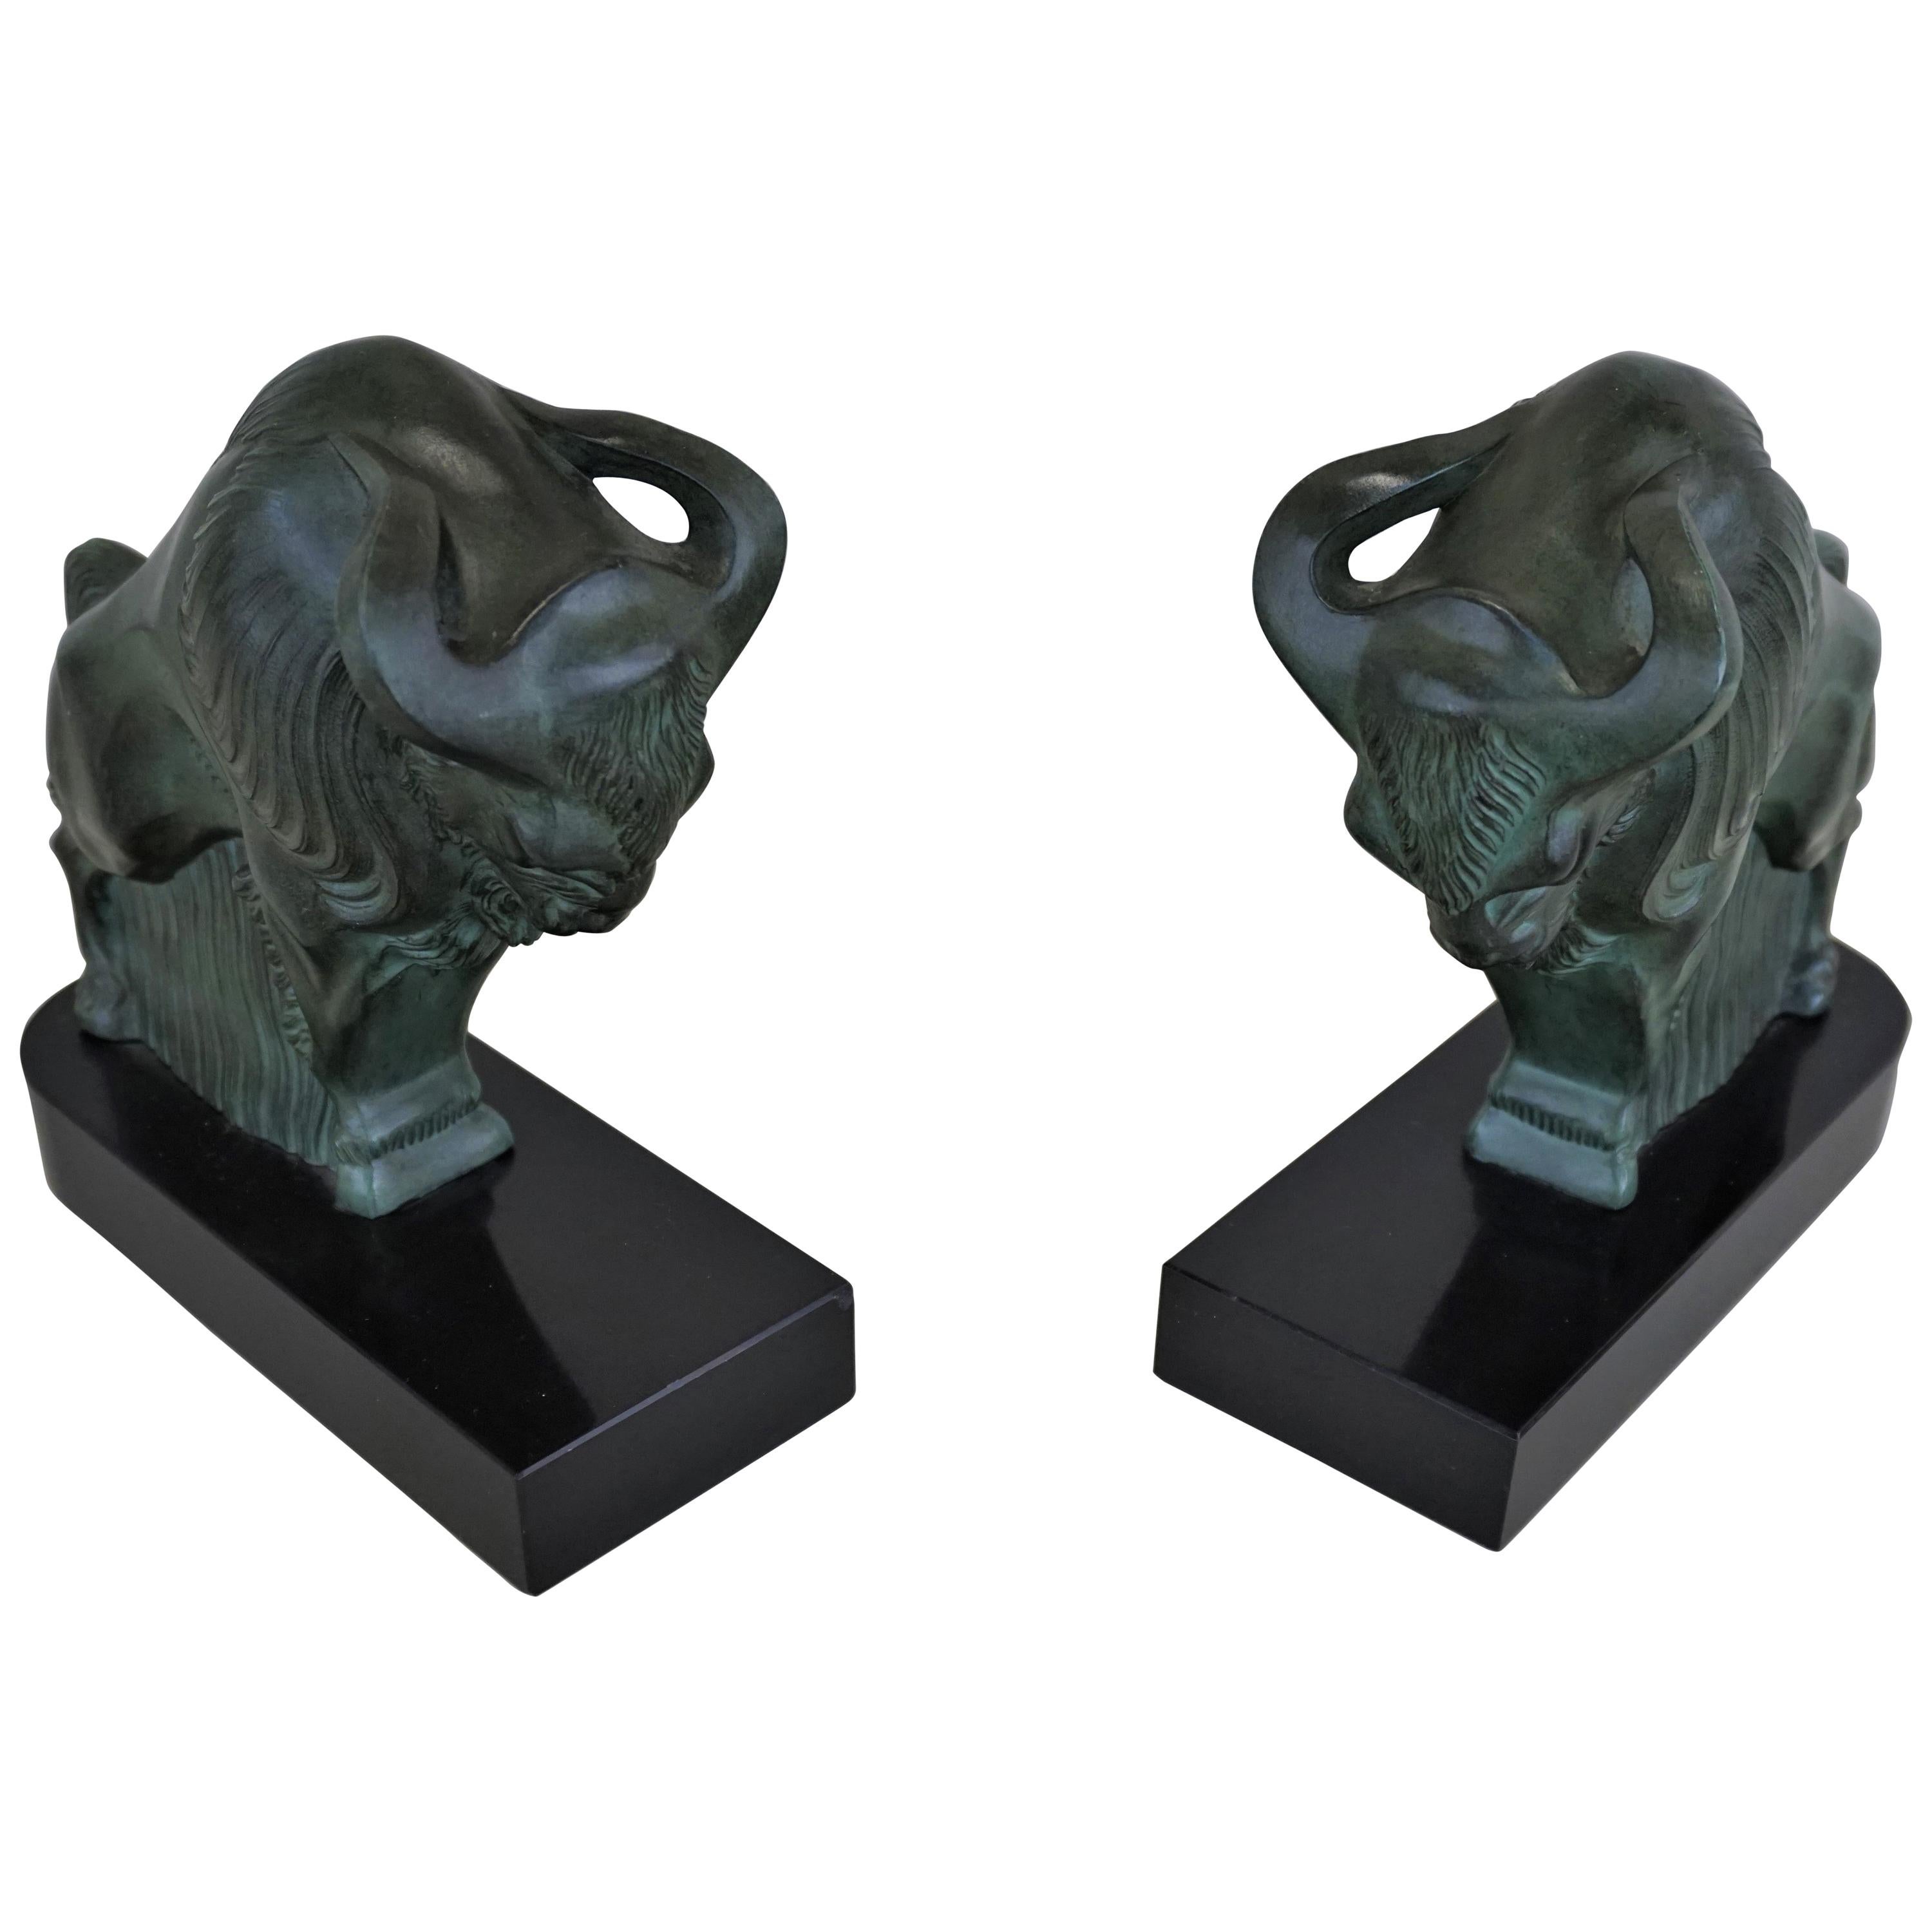 French Art Deco 1930s Buffalo Bookends by Max Le Verrier